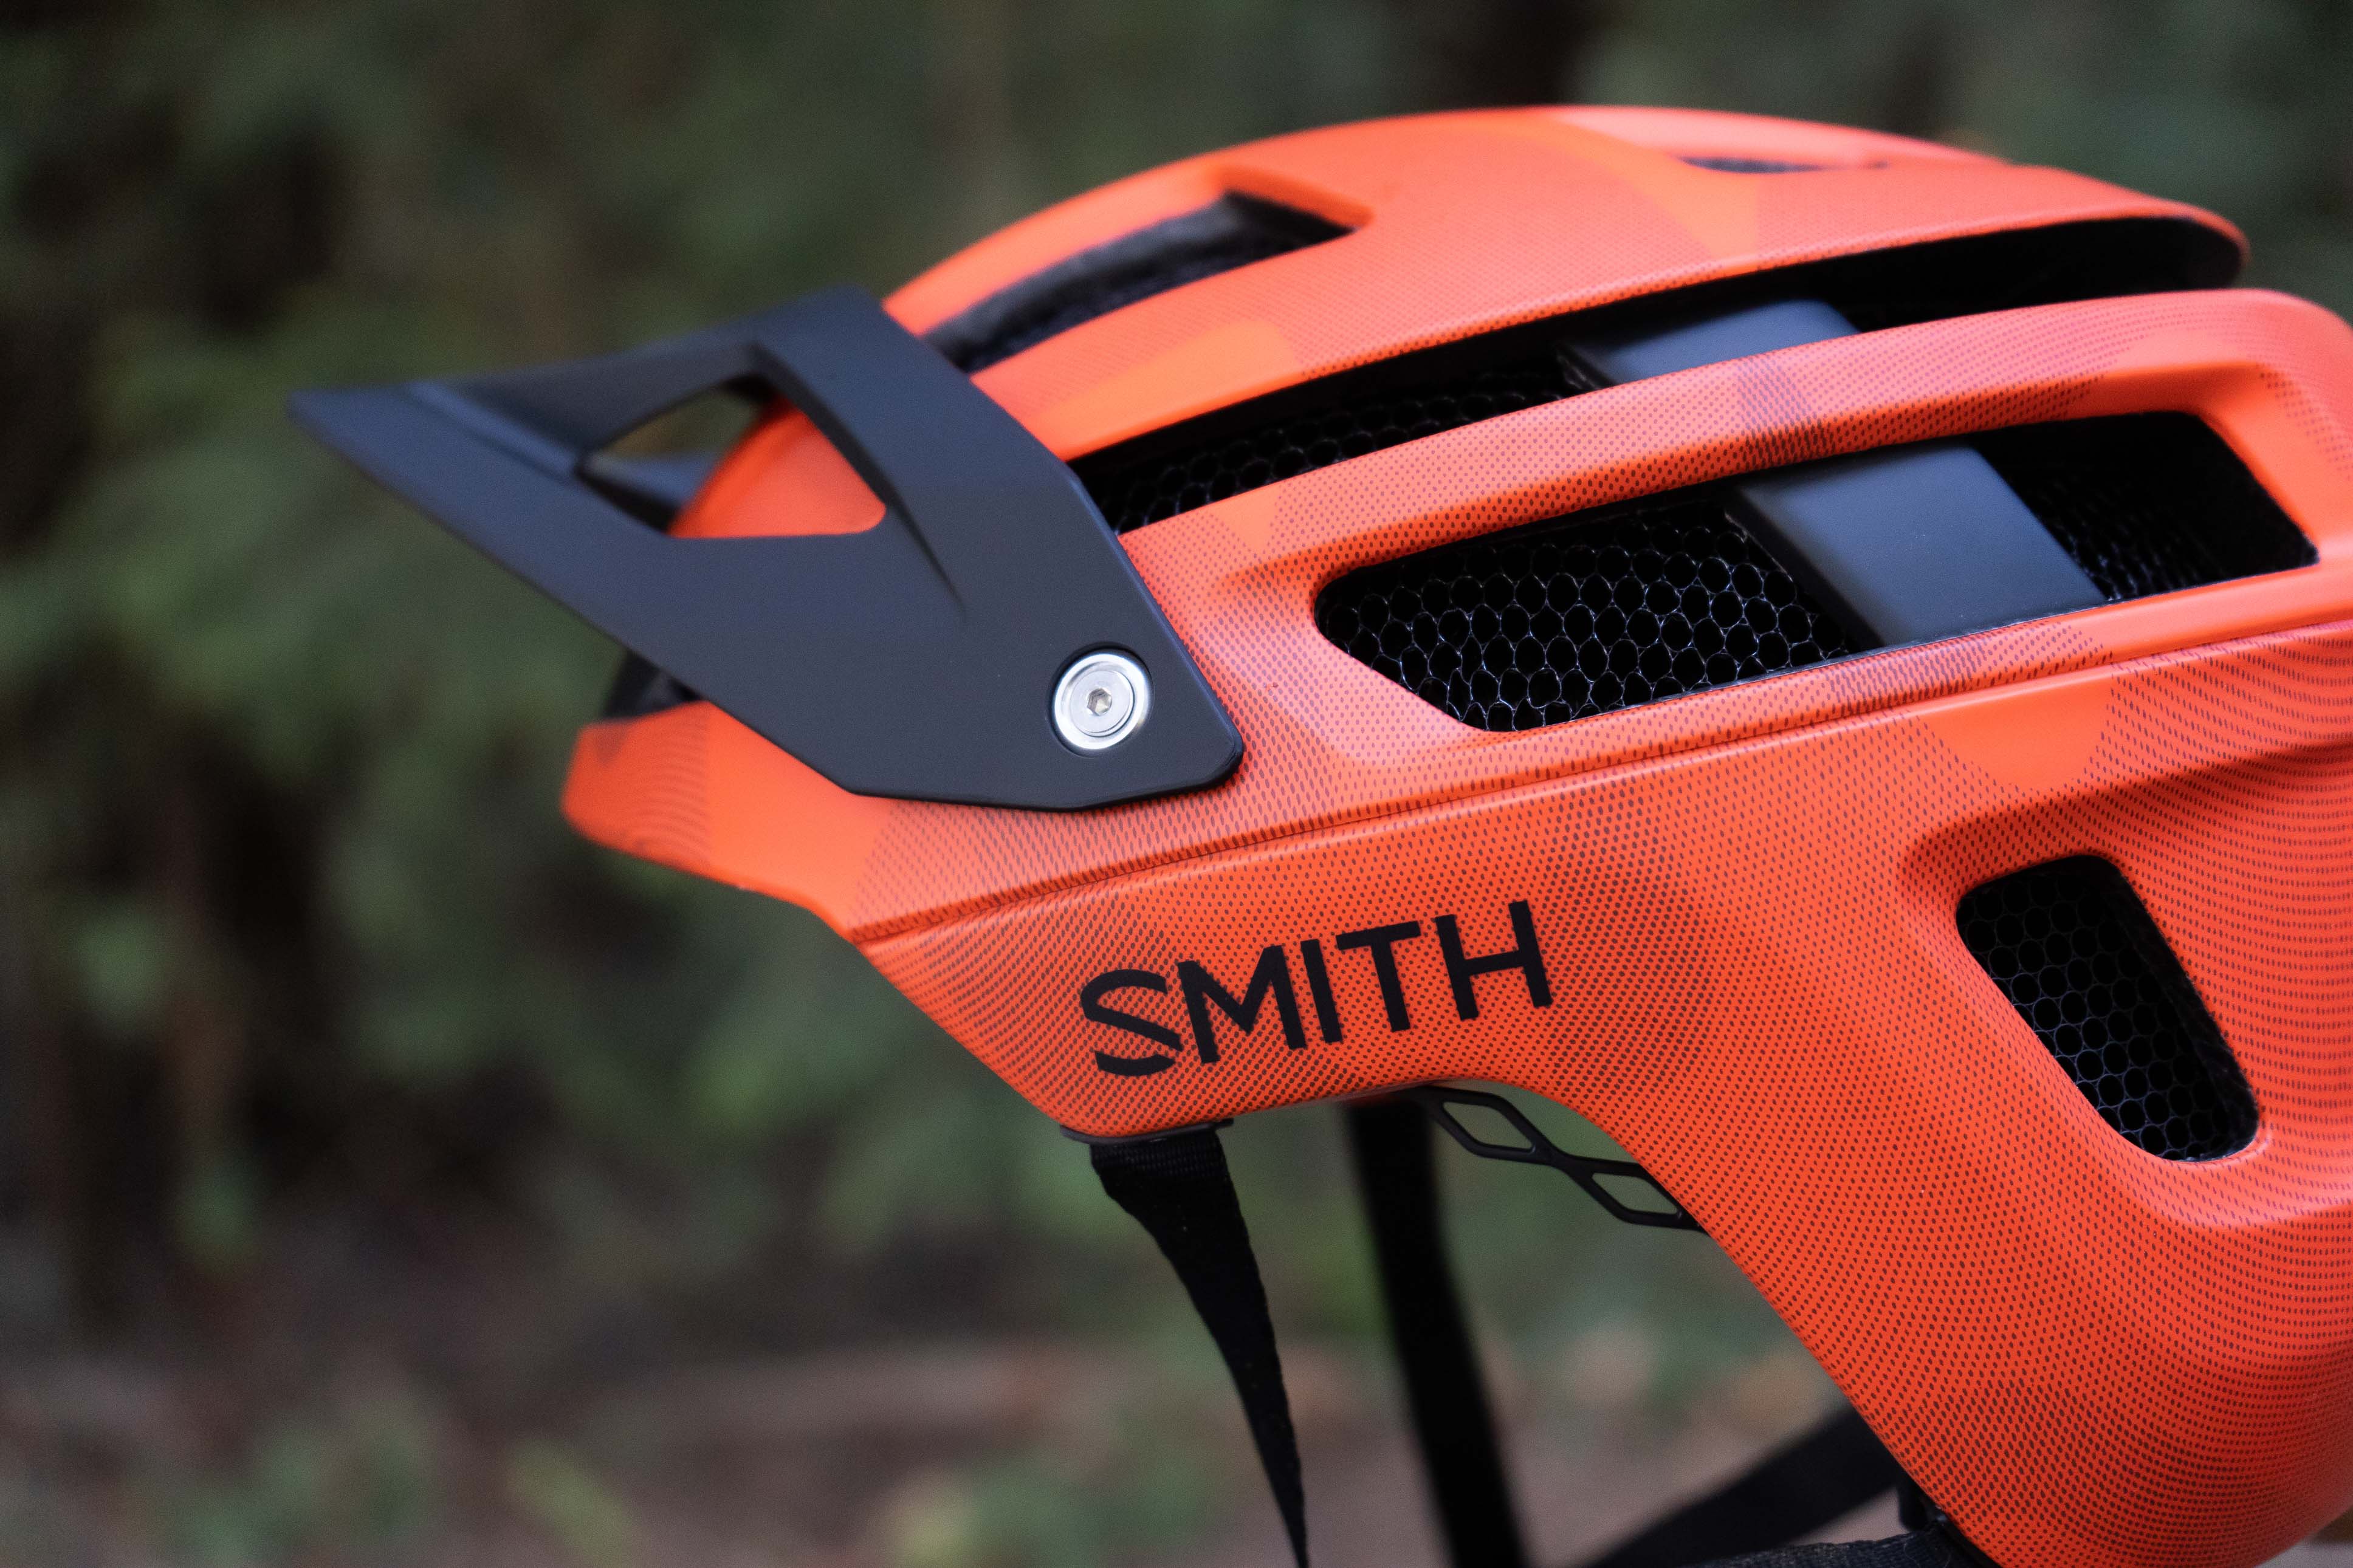 Smith Forefront 2 for sale and review